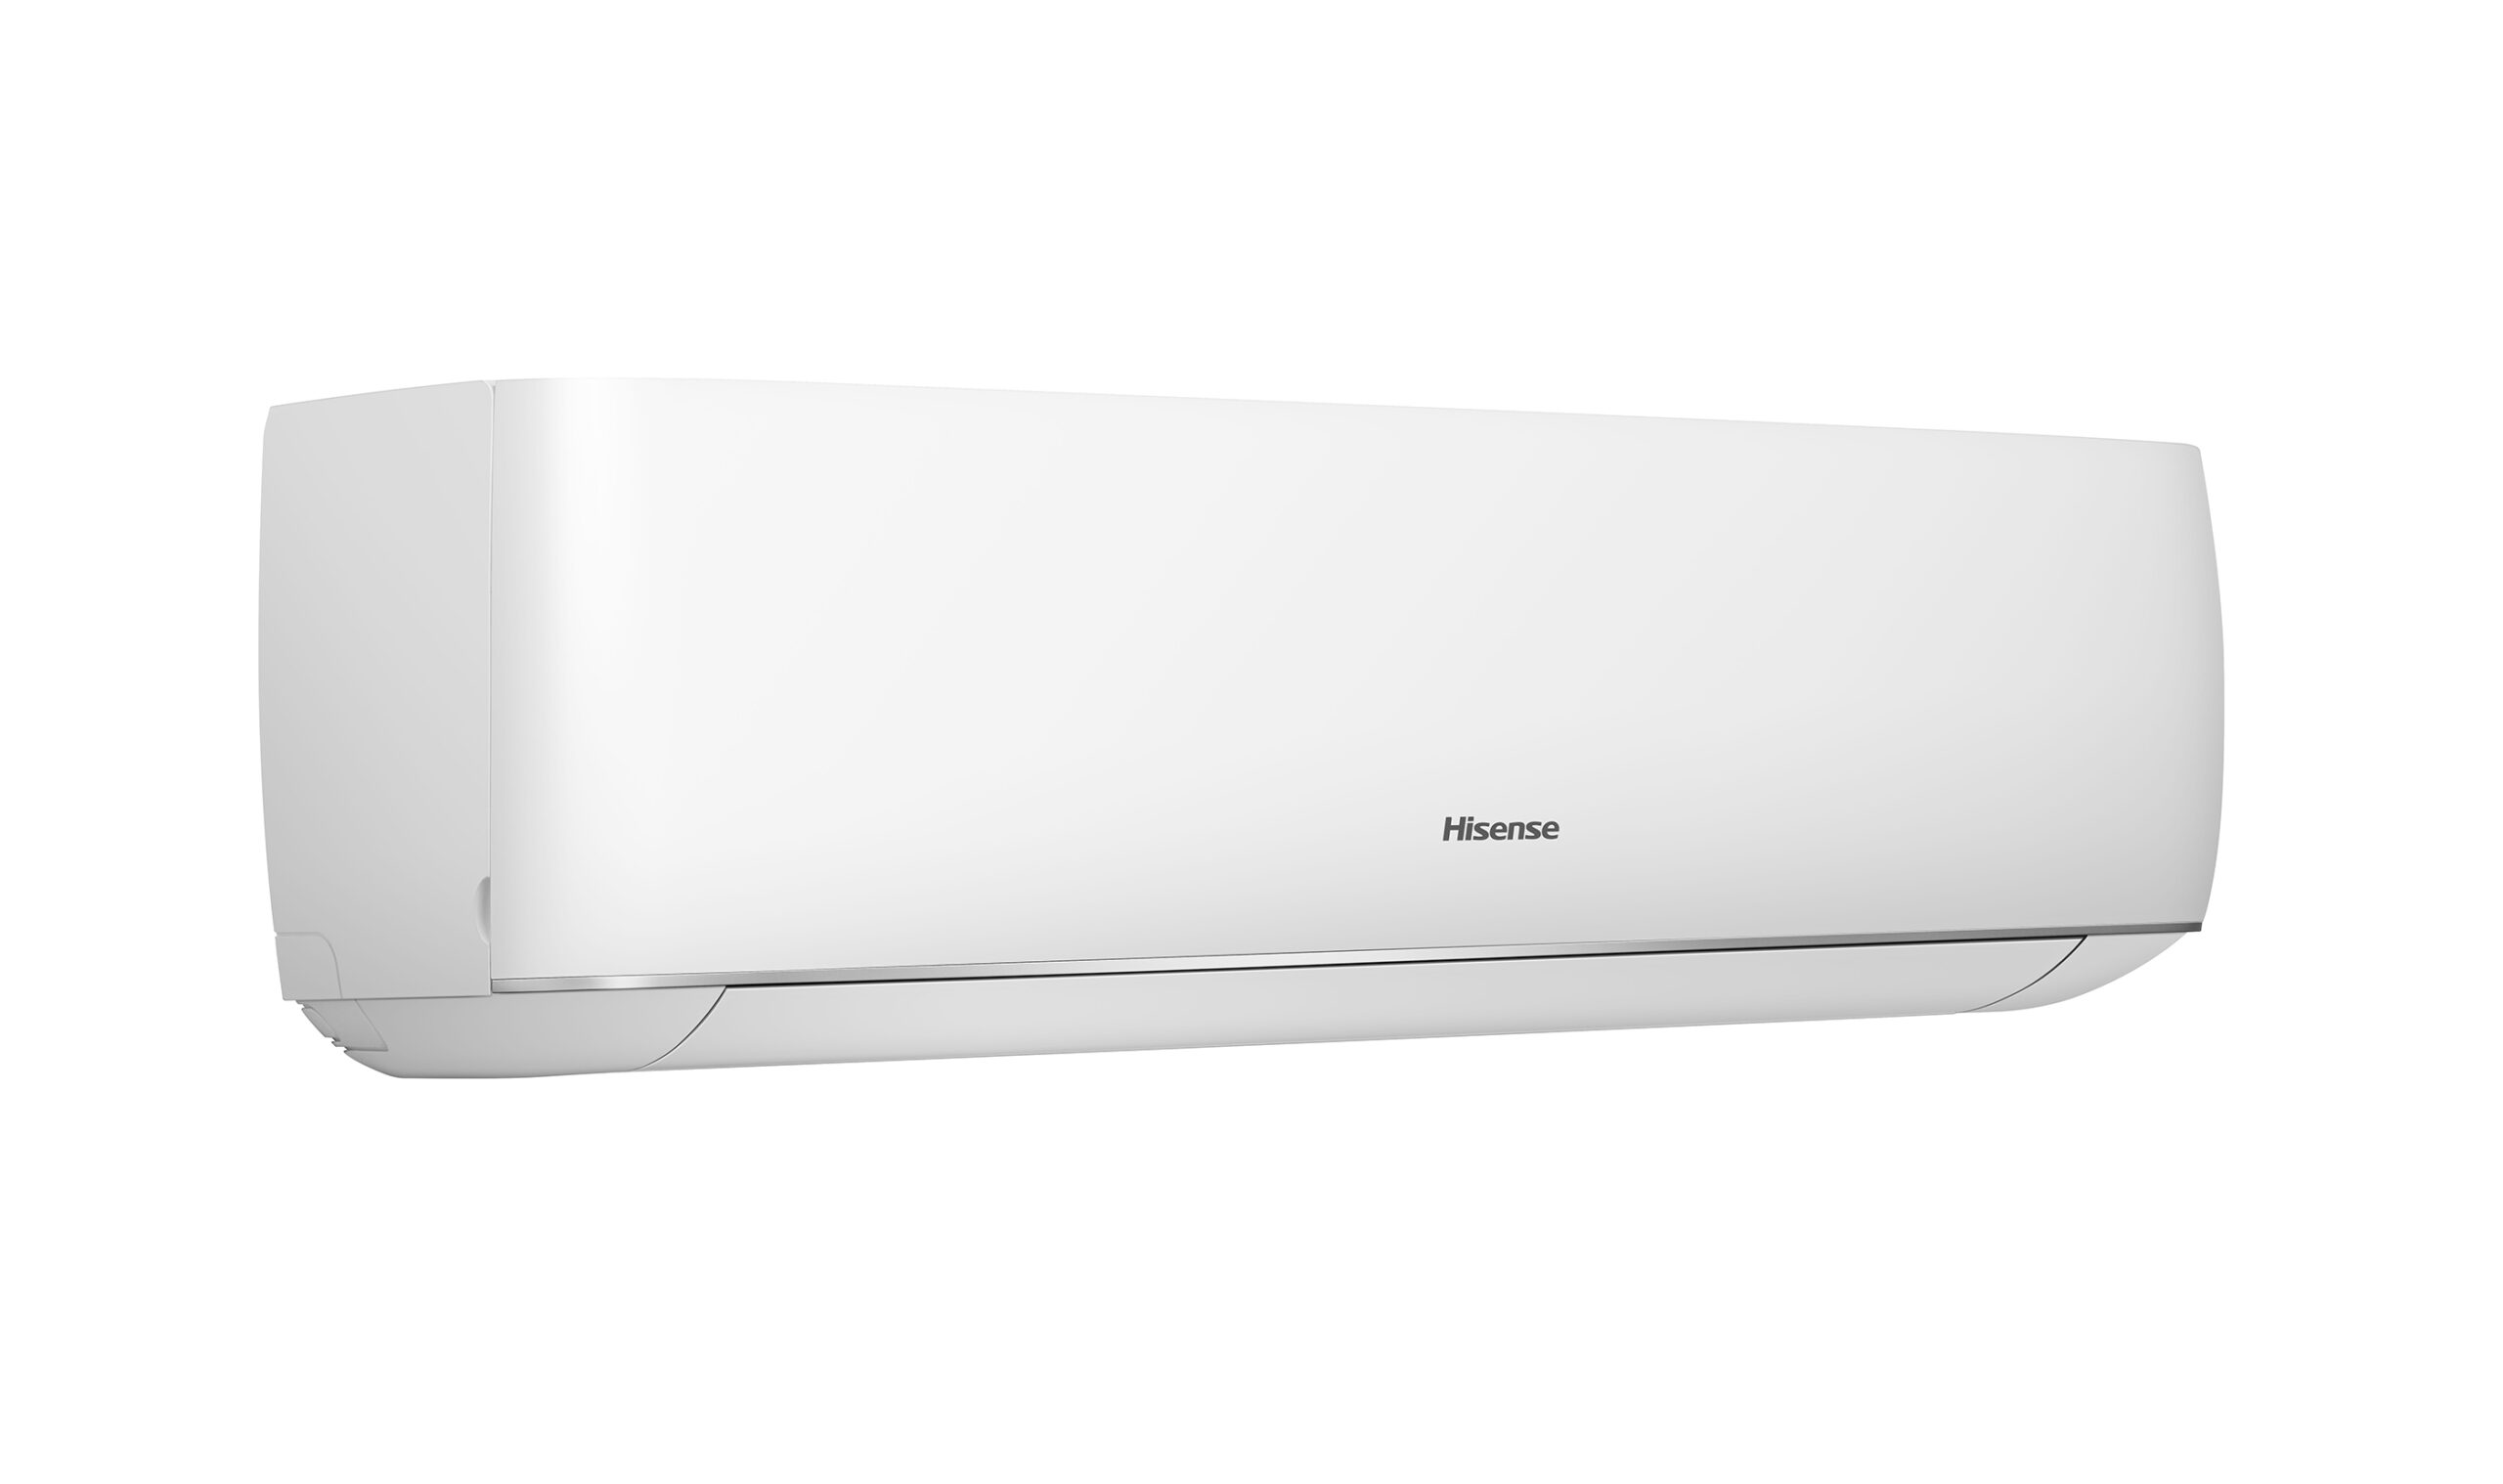 How To Use Hisense Air Conditioner